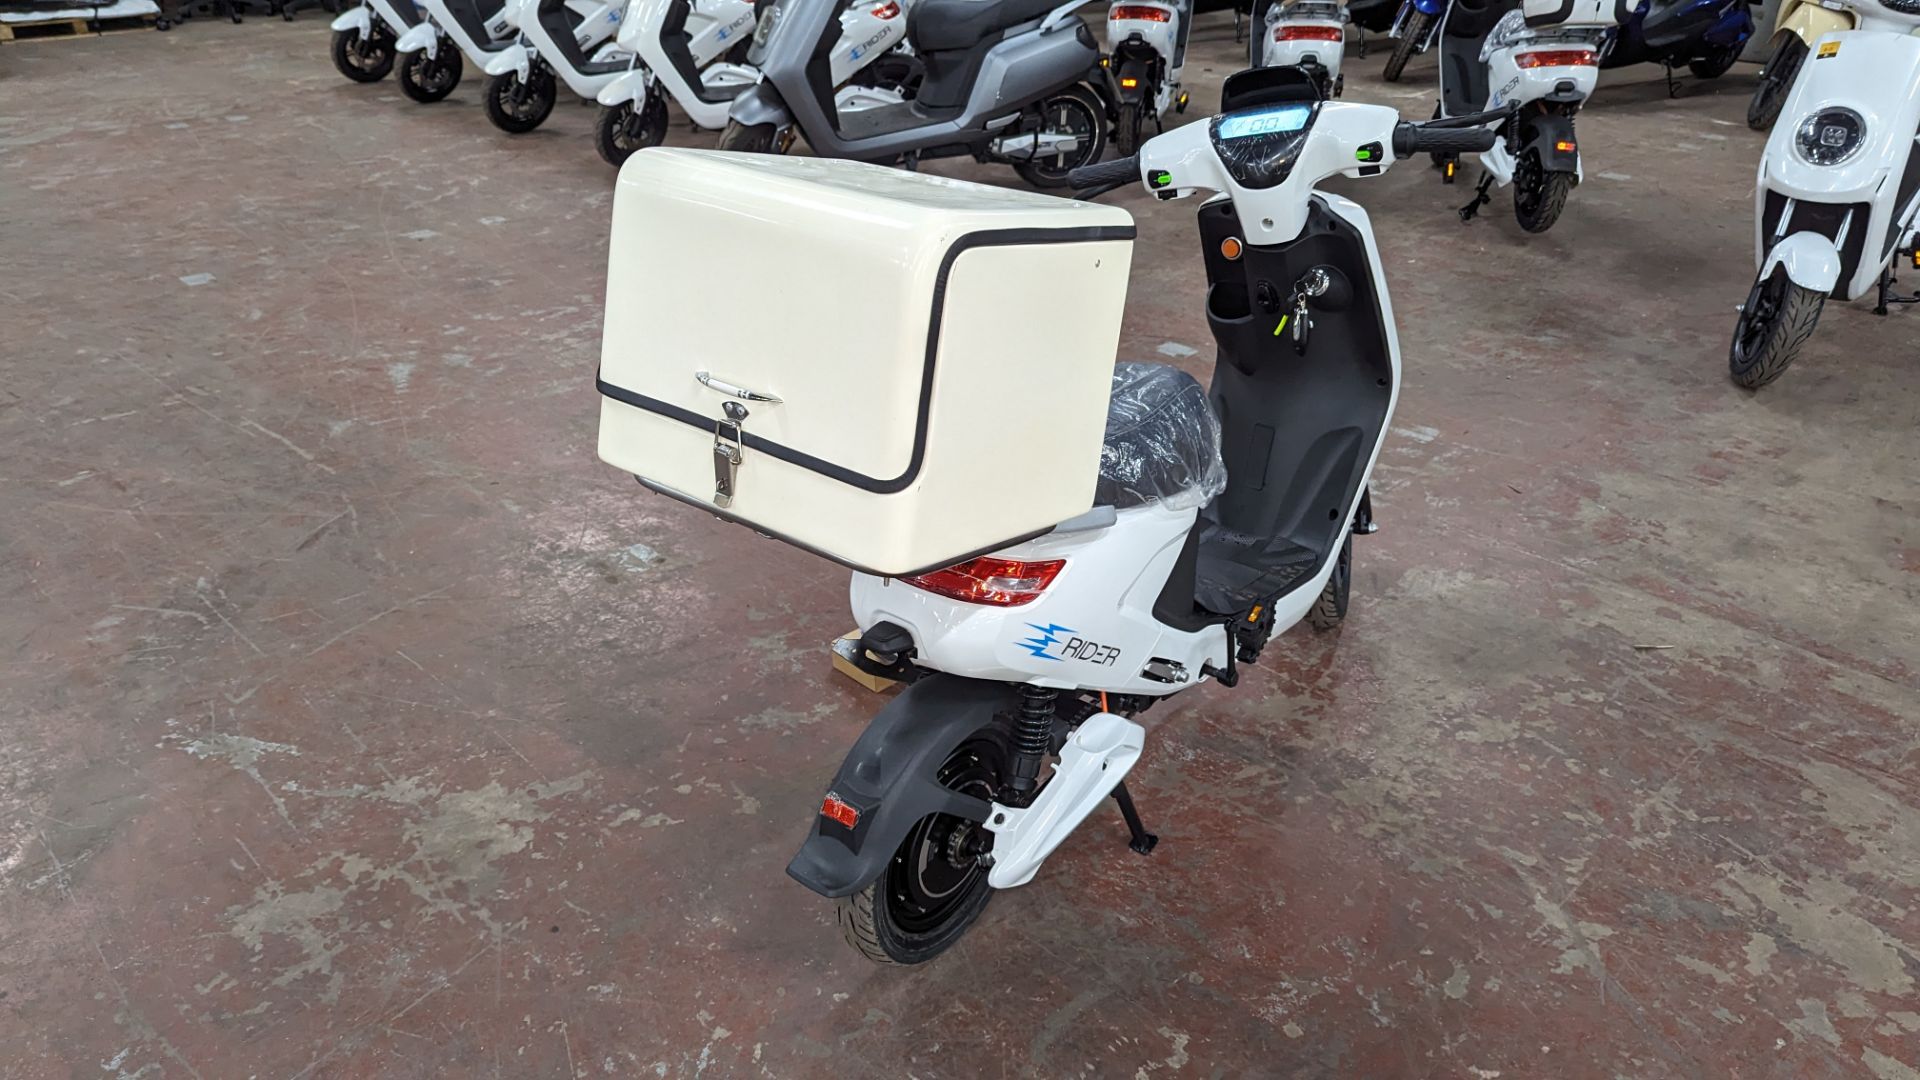 Model 18 Electric Bike: Zero (0) recorded miles, white body with black detailing, insulated box moun - Image 5 of 14